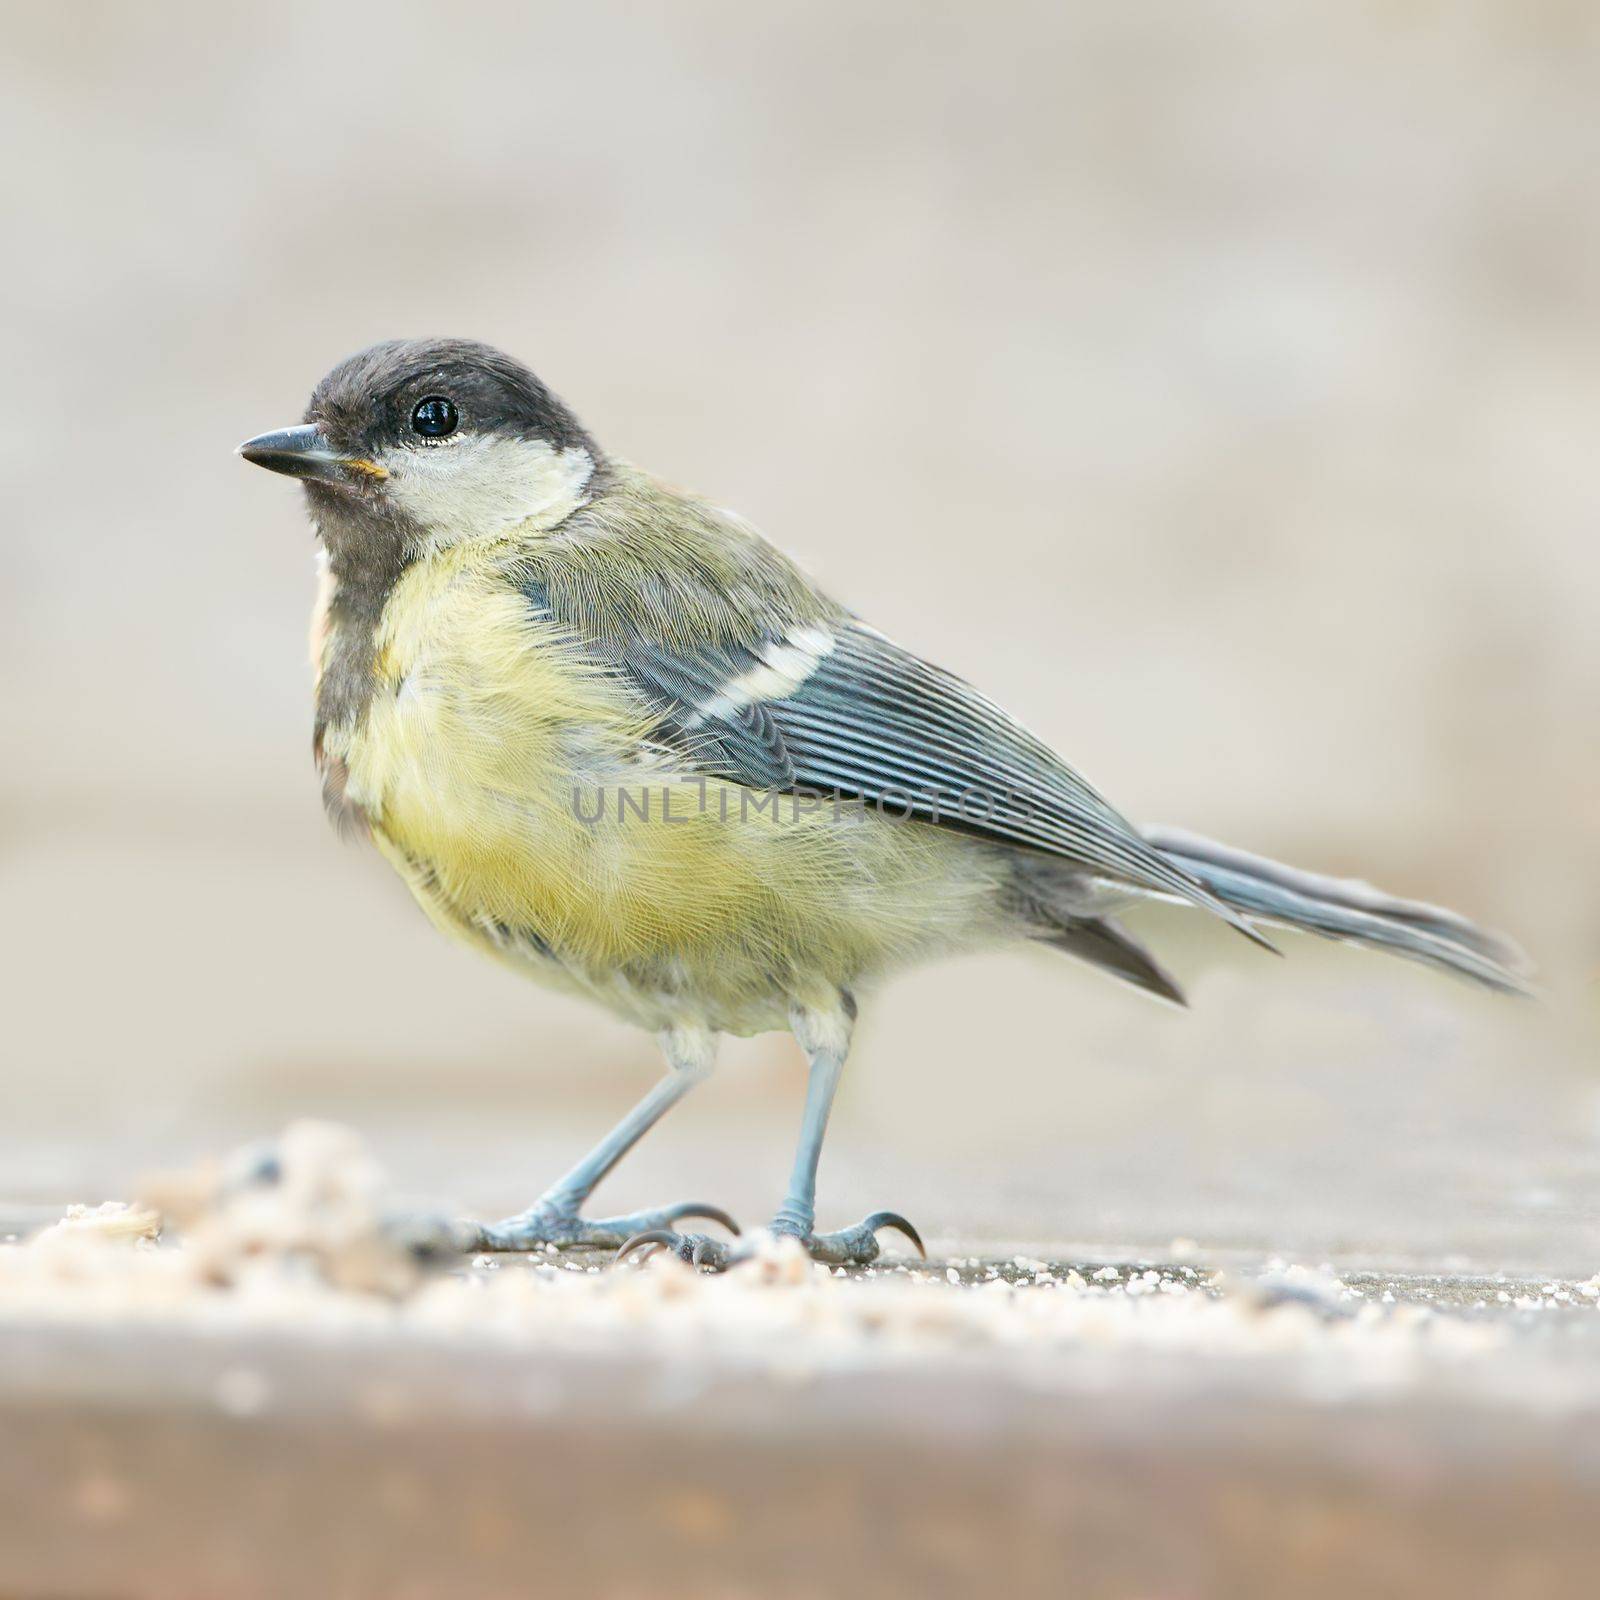 The Great Tit - Parus major. The Eurasian blue tit is a small passerine bird in the tit family Paridae. The bird is easily recognisable by its blue and yellow plumage